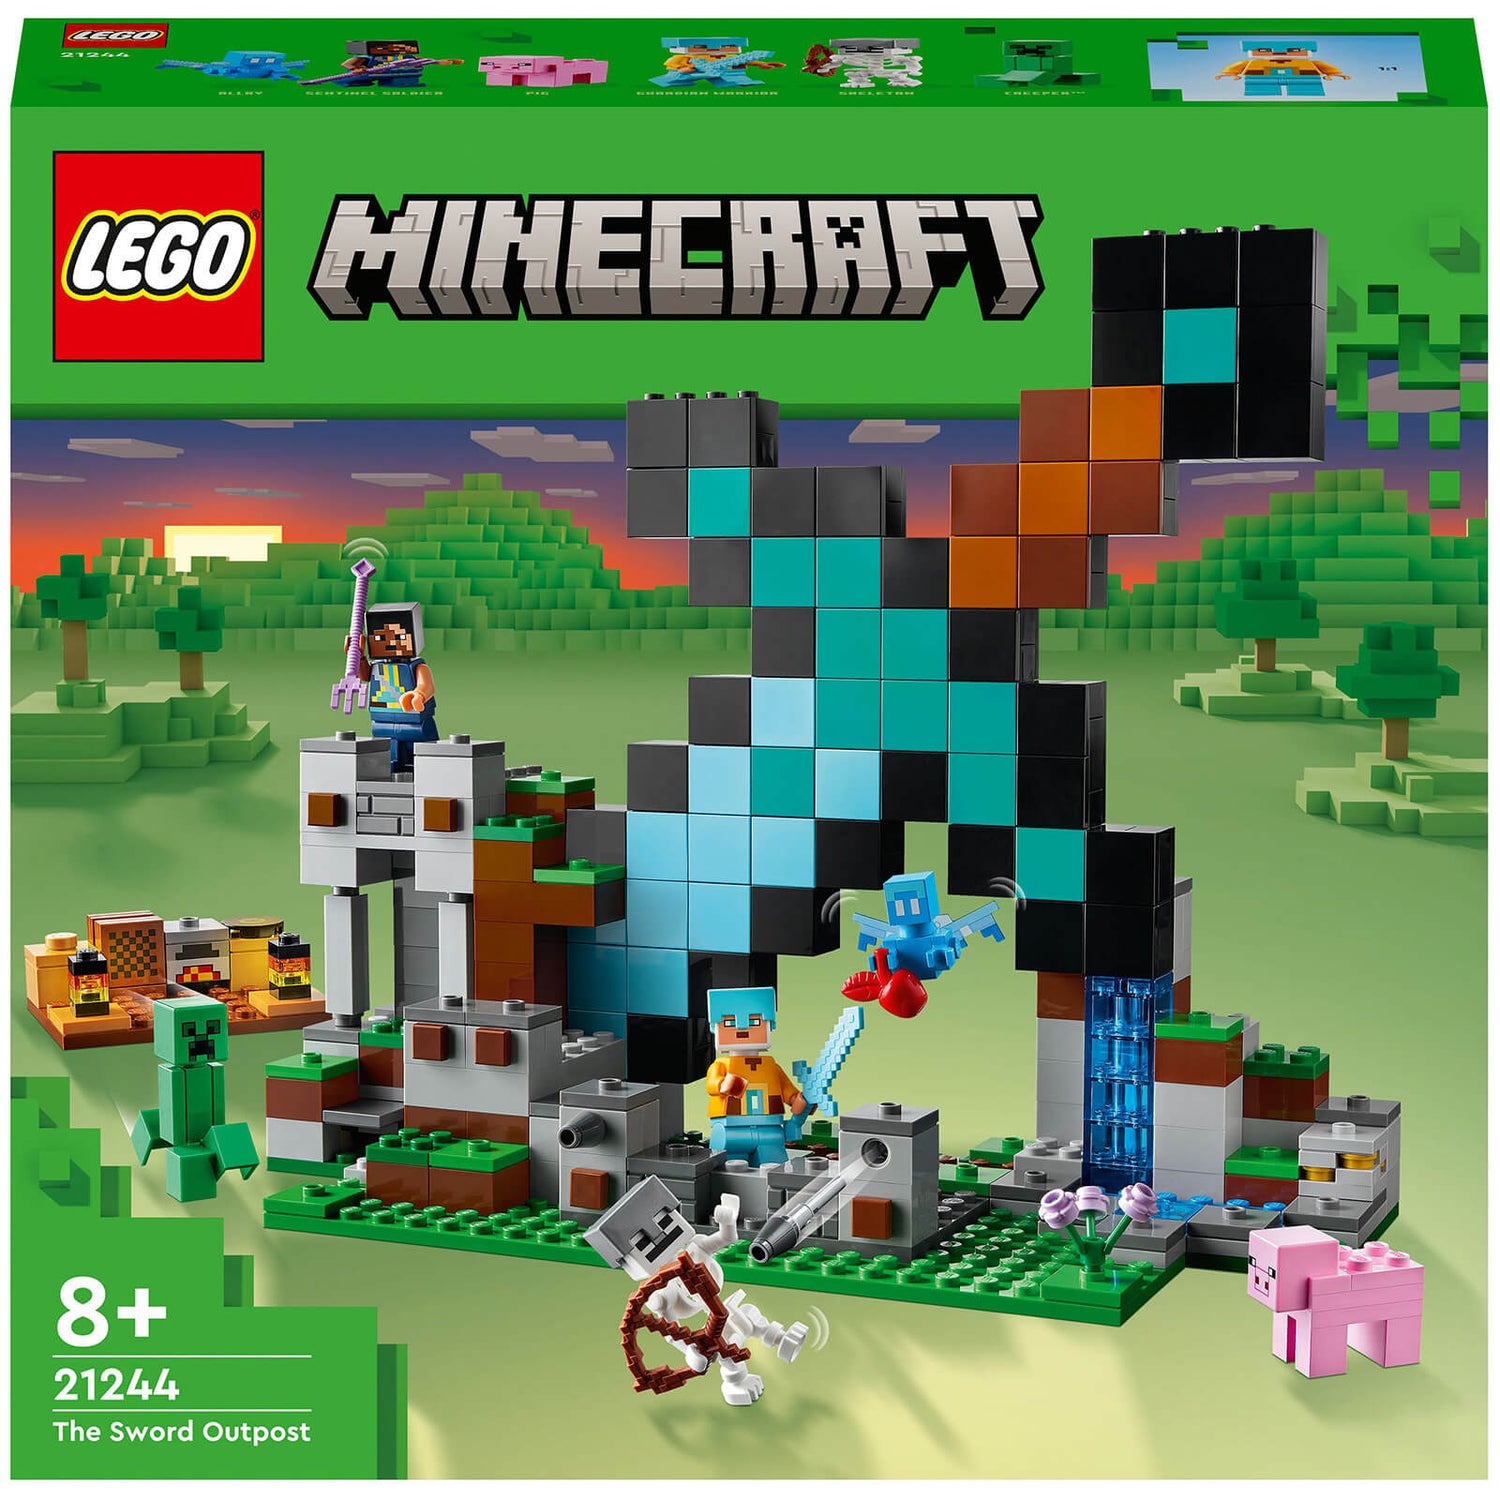 LEGO Minecraft The Sword Outpost Set (21244)